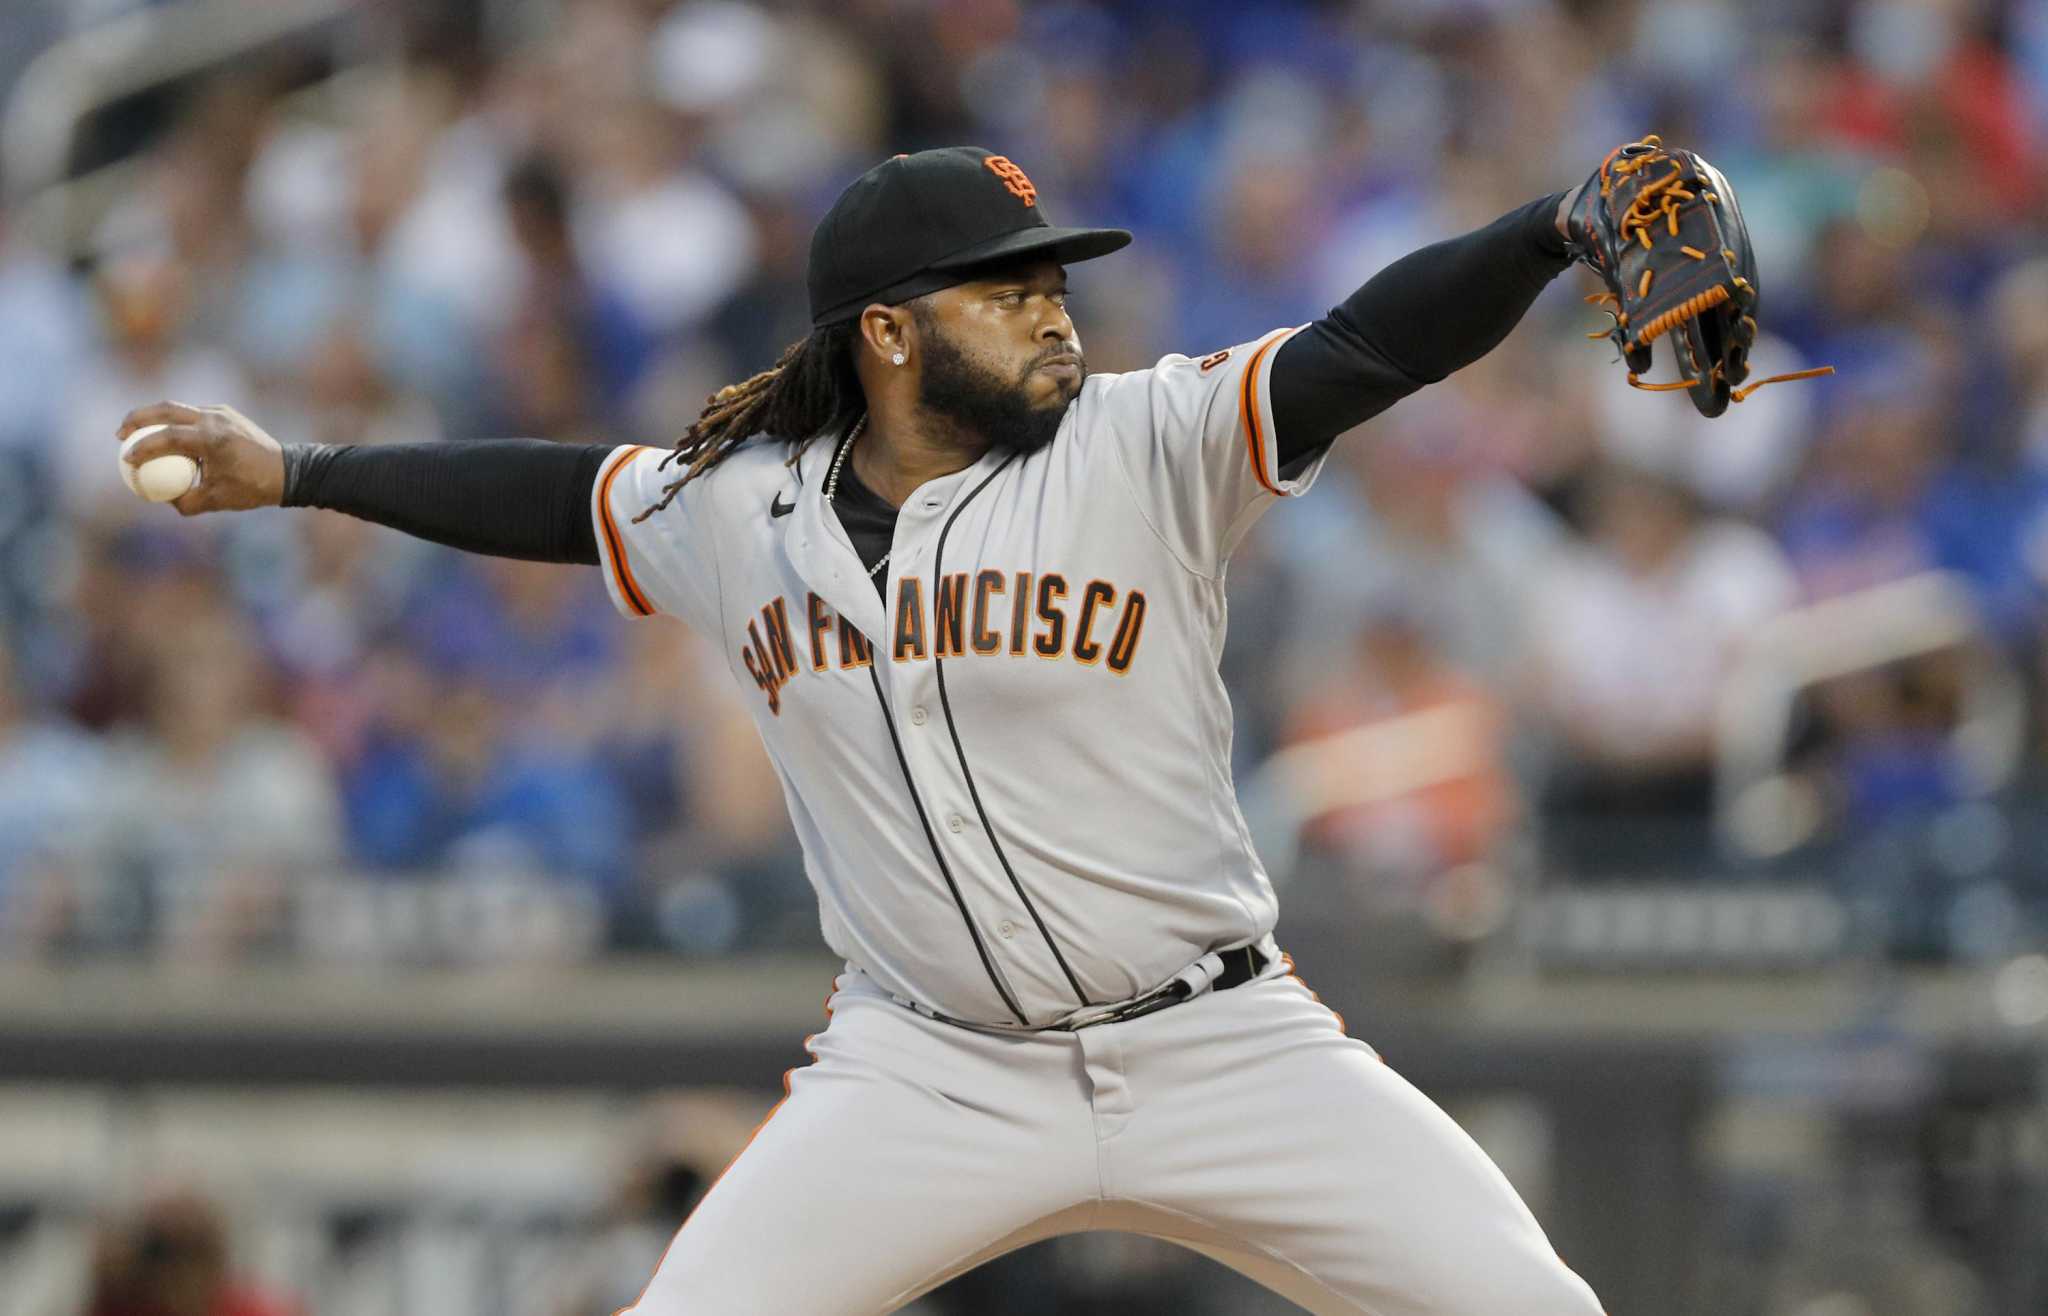 Giants RHP Cueto taken to hospital, no signs of concussion